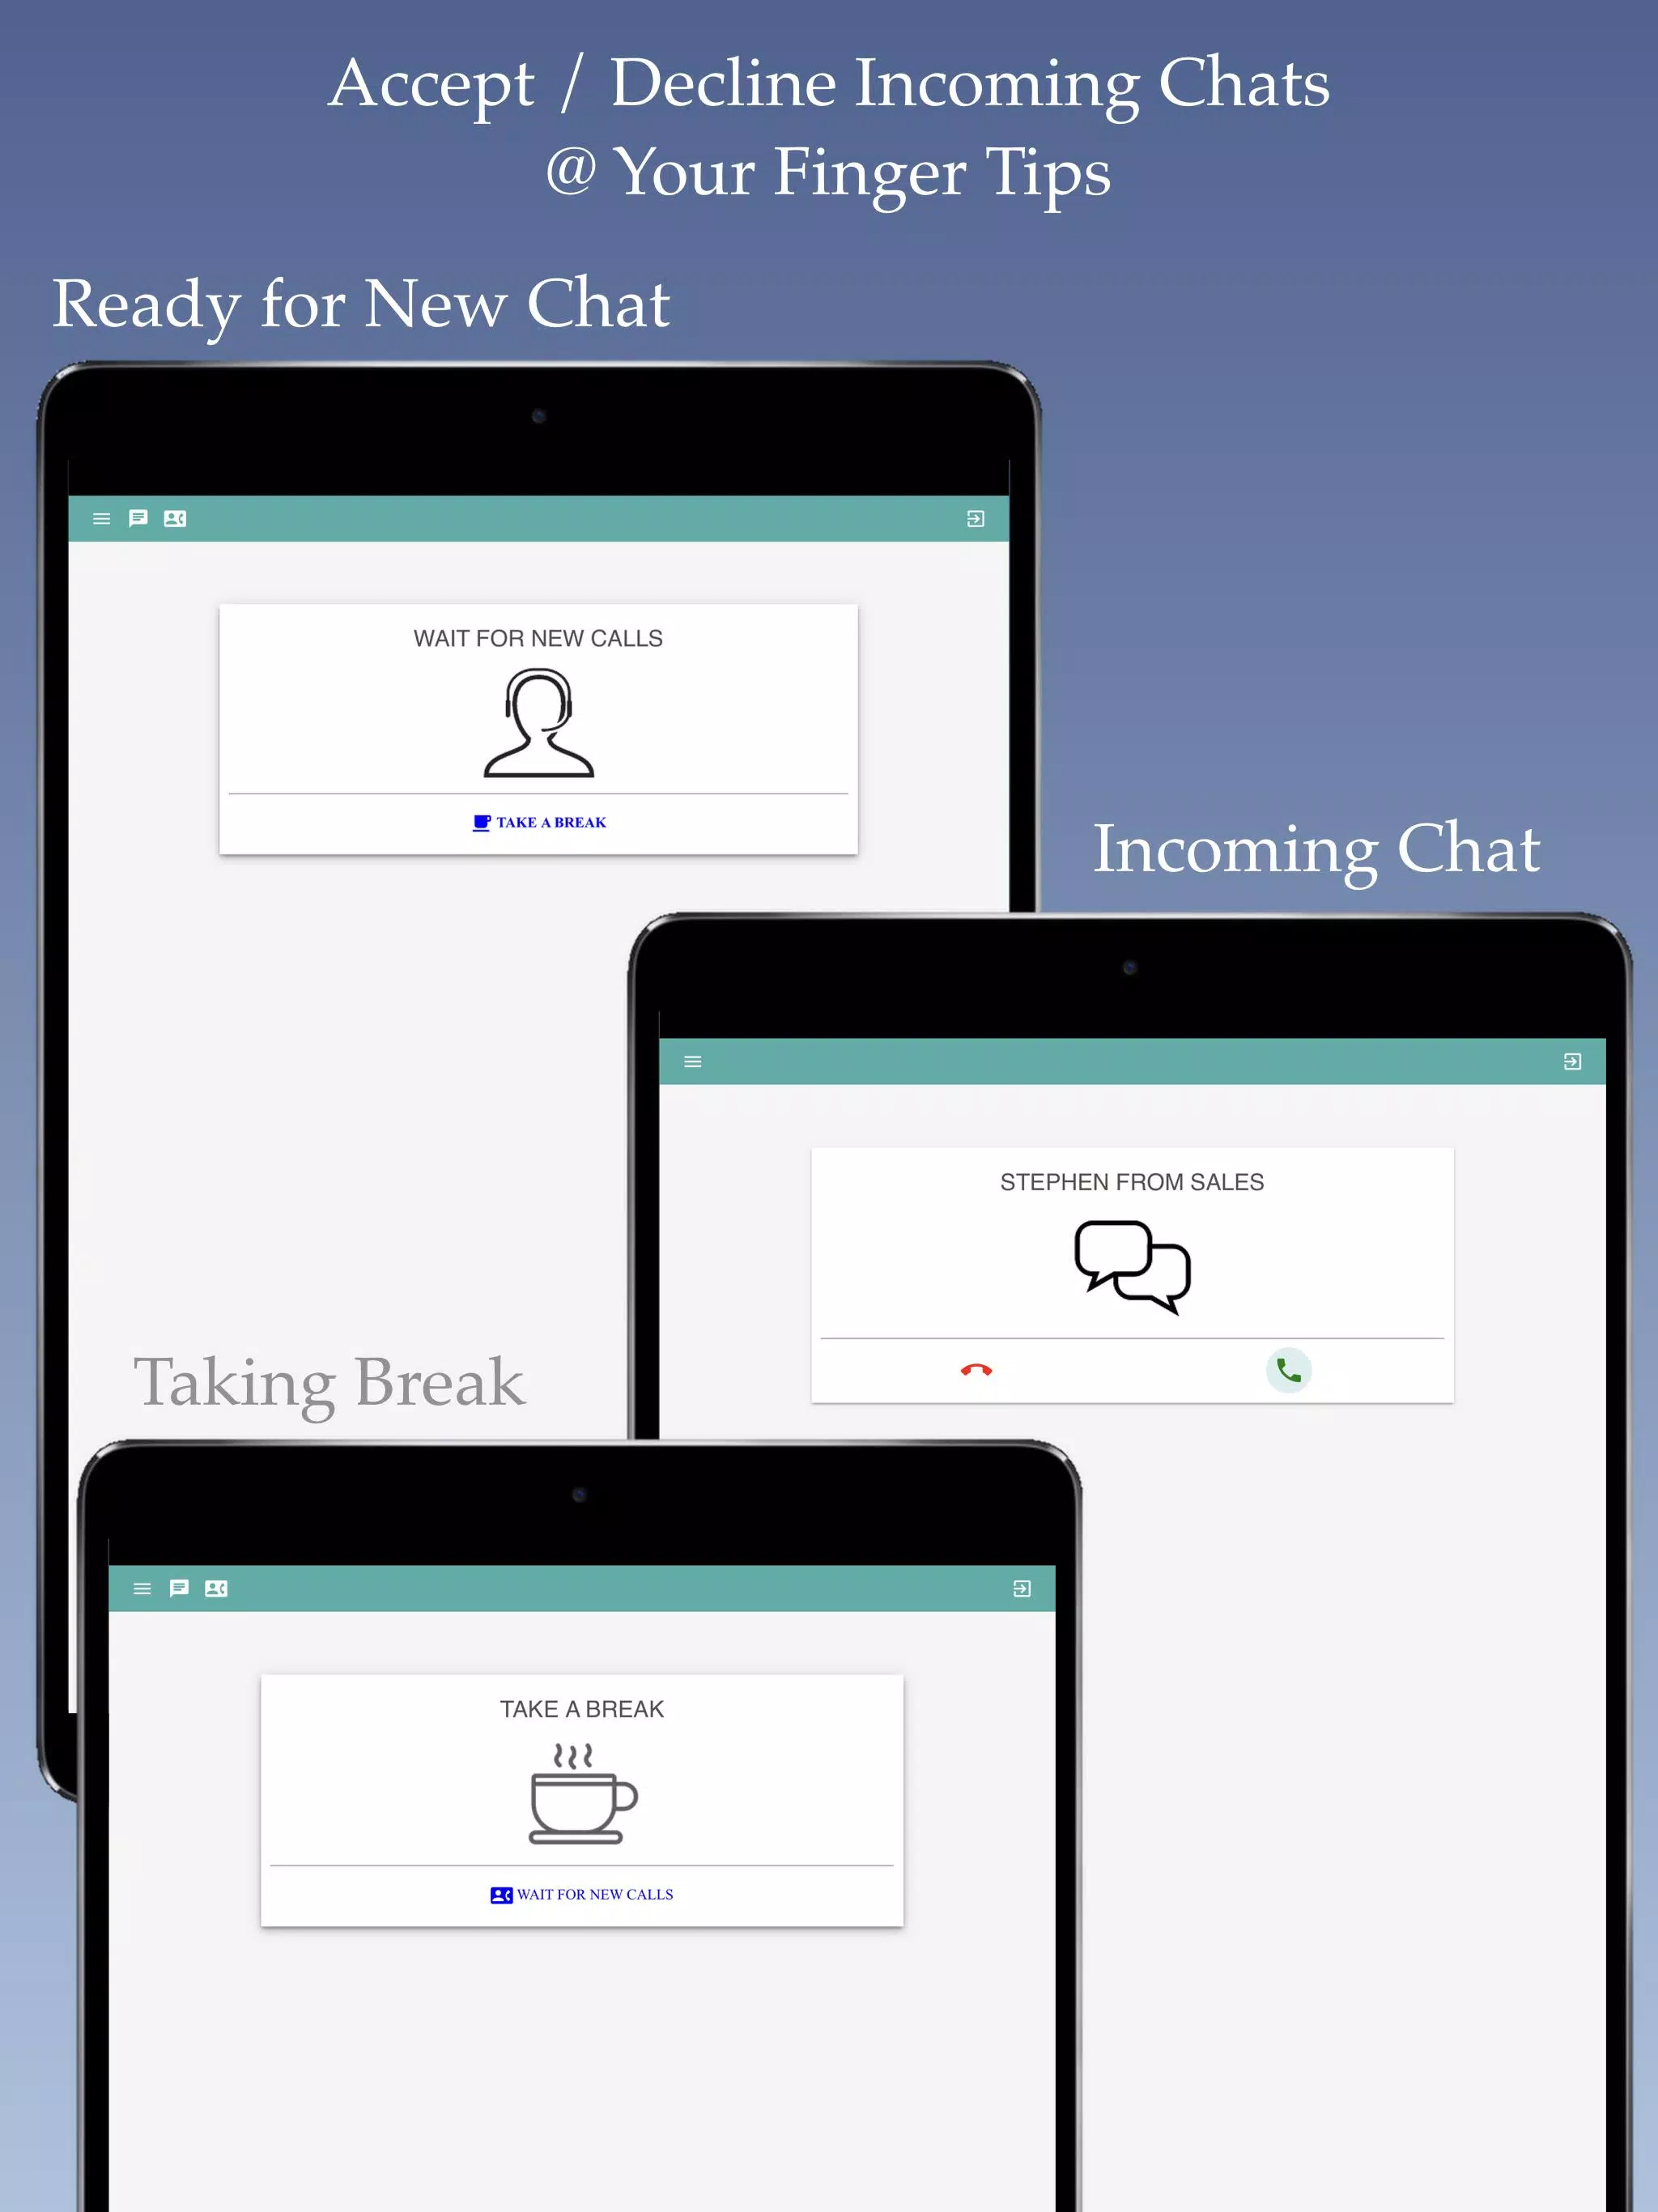 Live chat for android